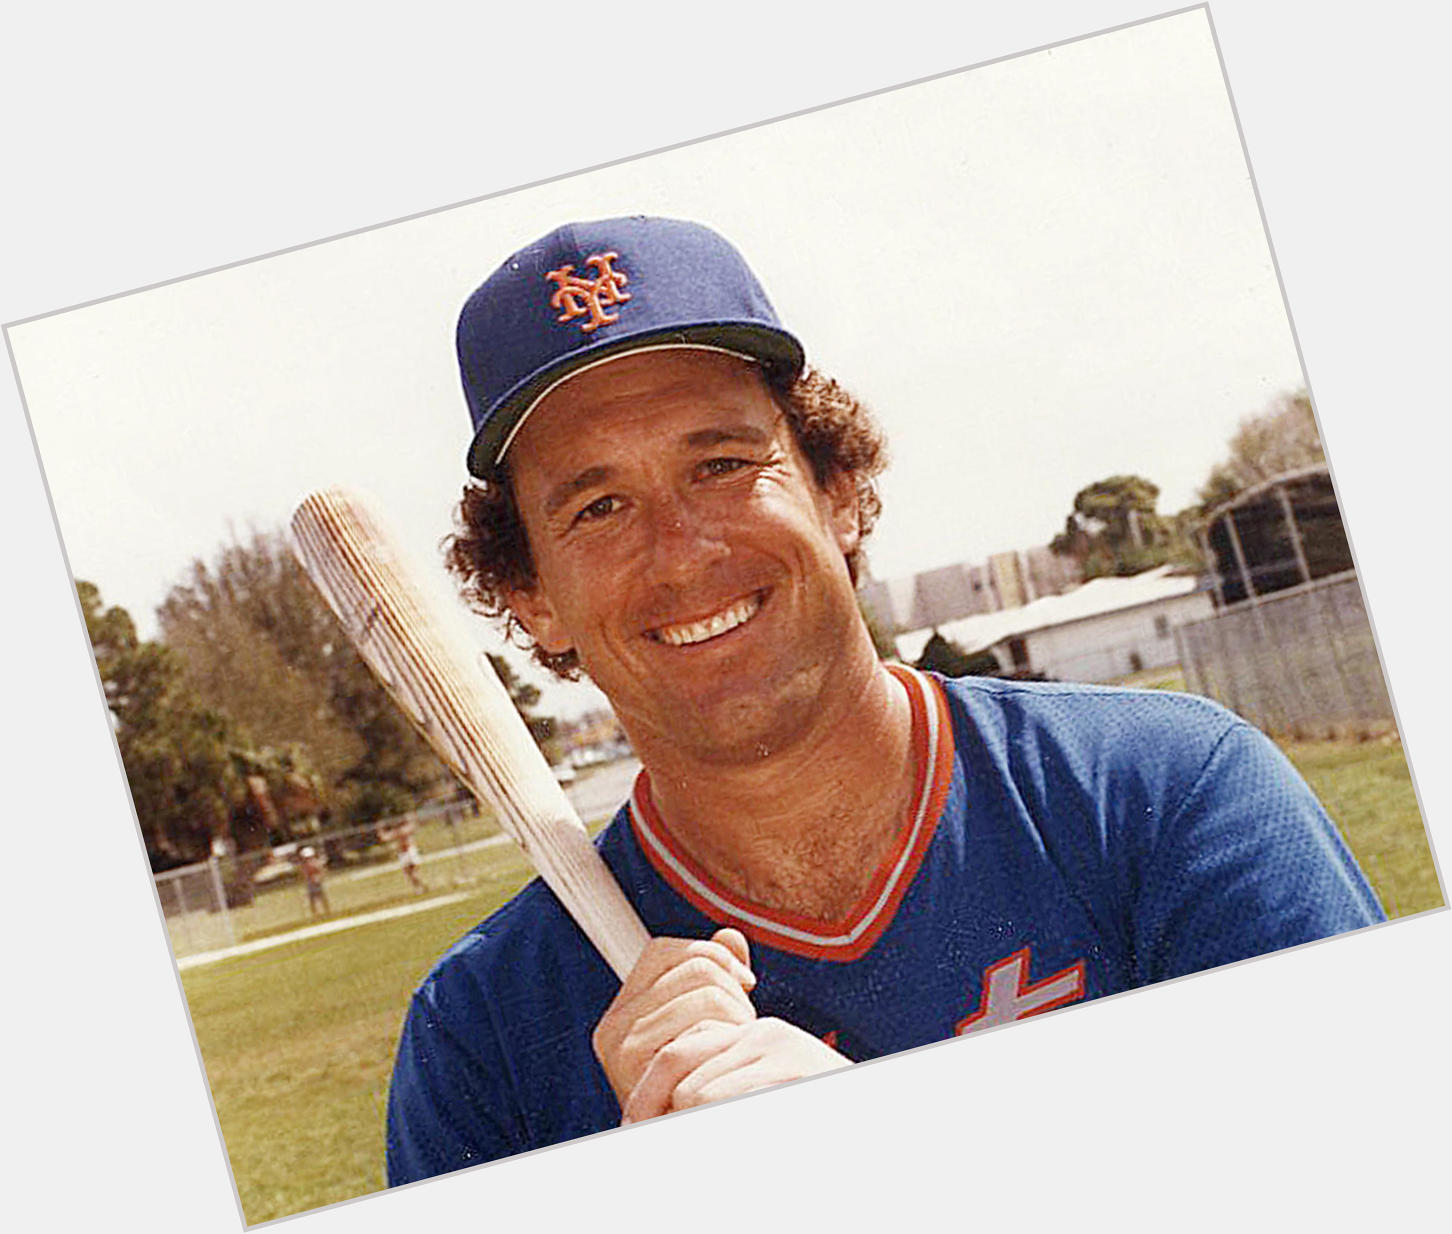 <a href="/hot-men/gary-carter/is-he-hall-fame-going-die-alive-dying">Gary Carter</a>  